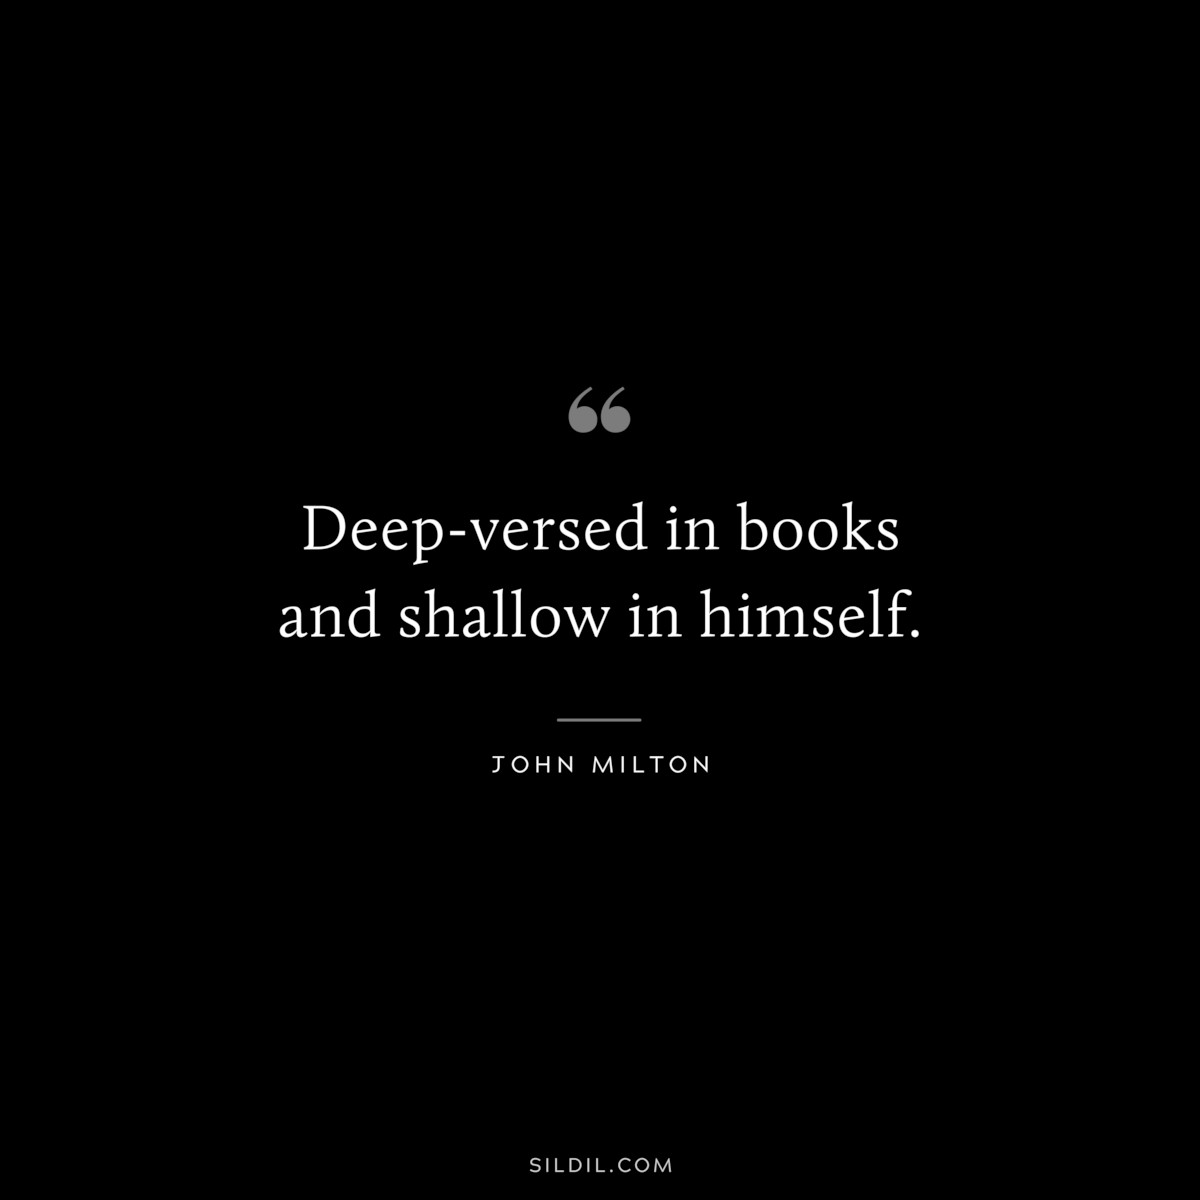 Deep-versed in books and shallow in himself. ― John Milton